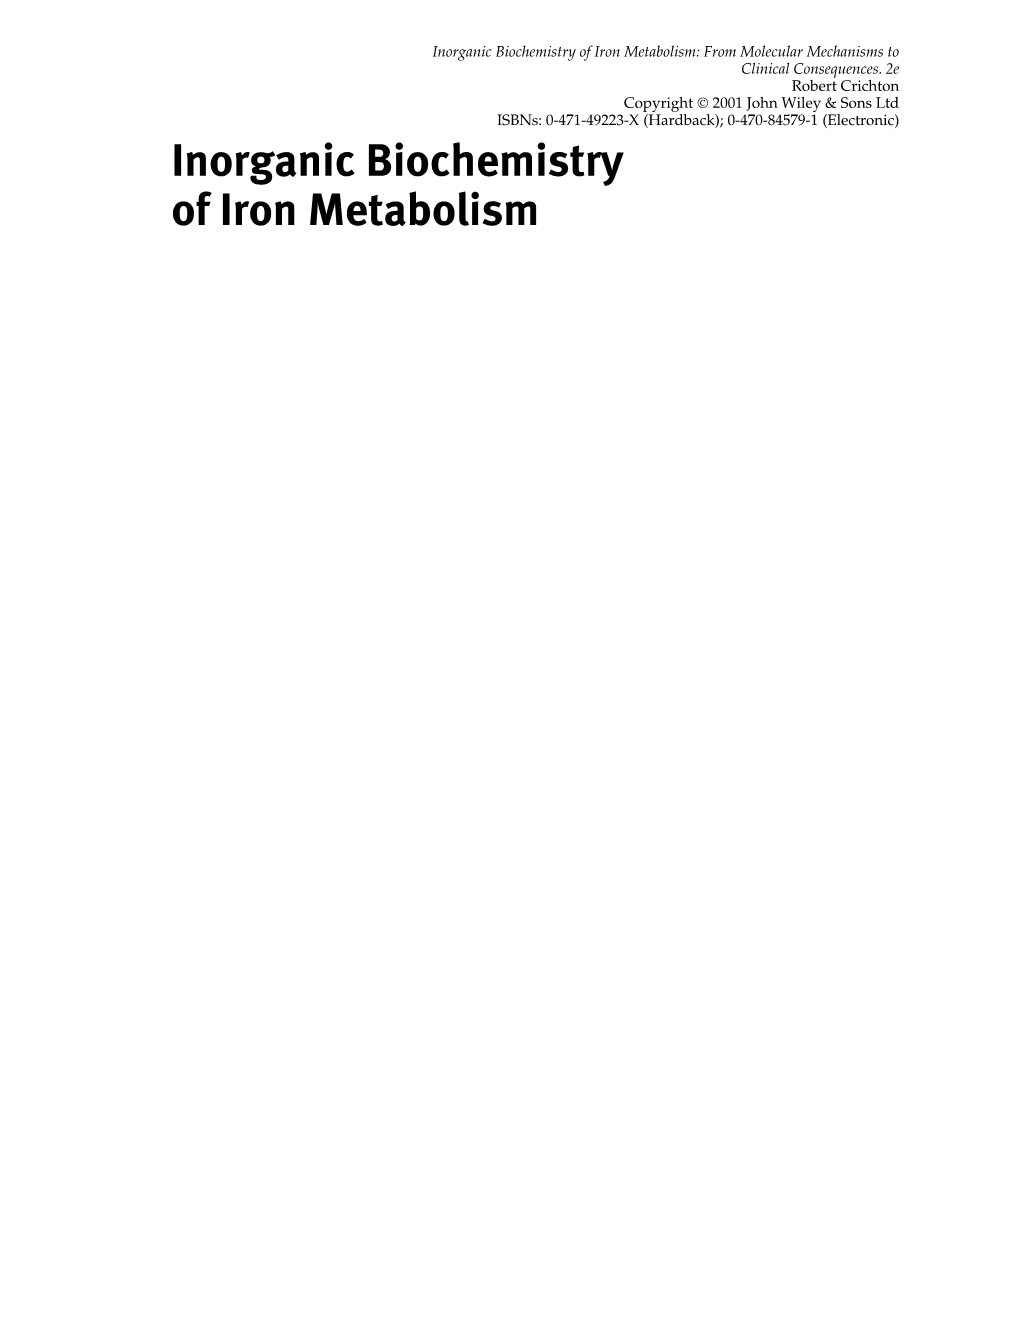 Inorganic Biochemistry of Iron Metabolism: from Molecular Mechanisms to Clinical Consequences